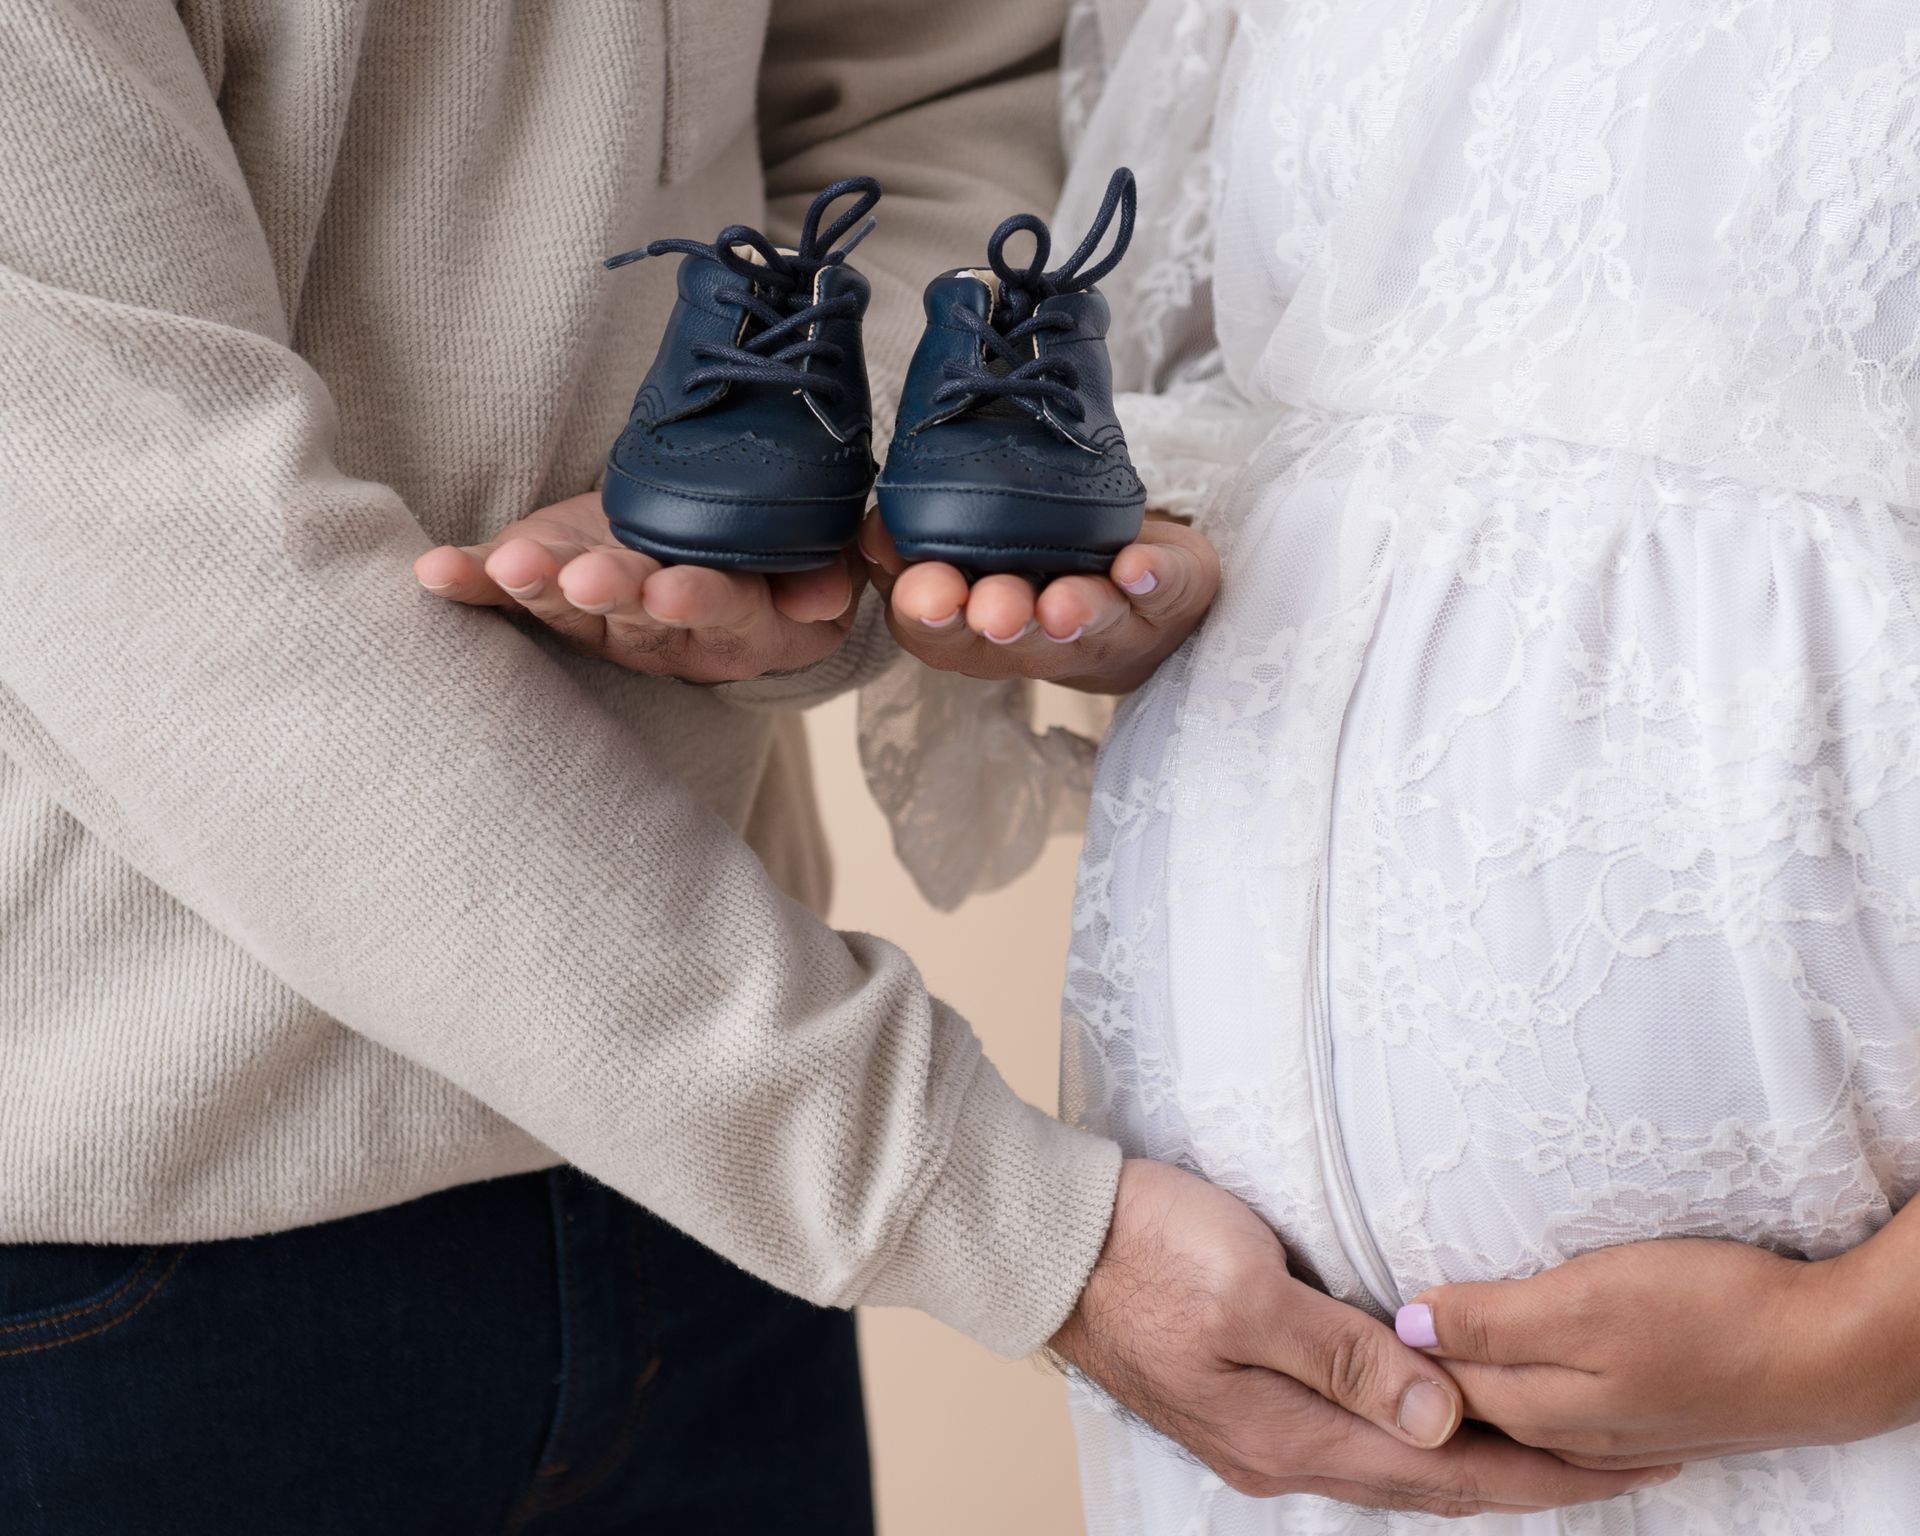 a pregnant woman is holding a pair of baby shoes in her hands .